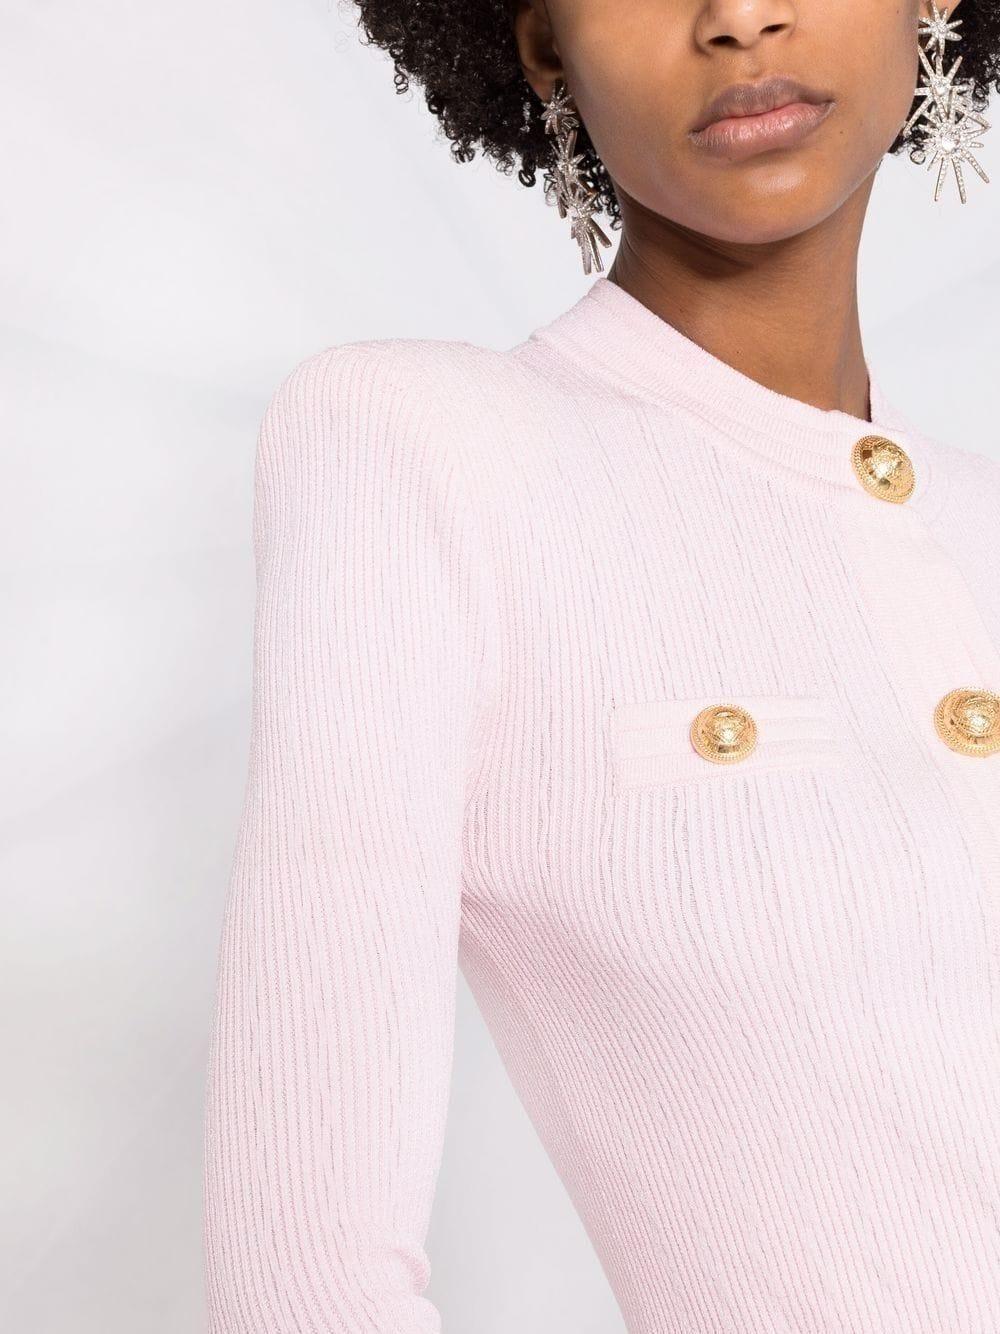 Balmain Cropped Pale Pink Knit Cardigan With Gold-tone Buttons | Lyst